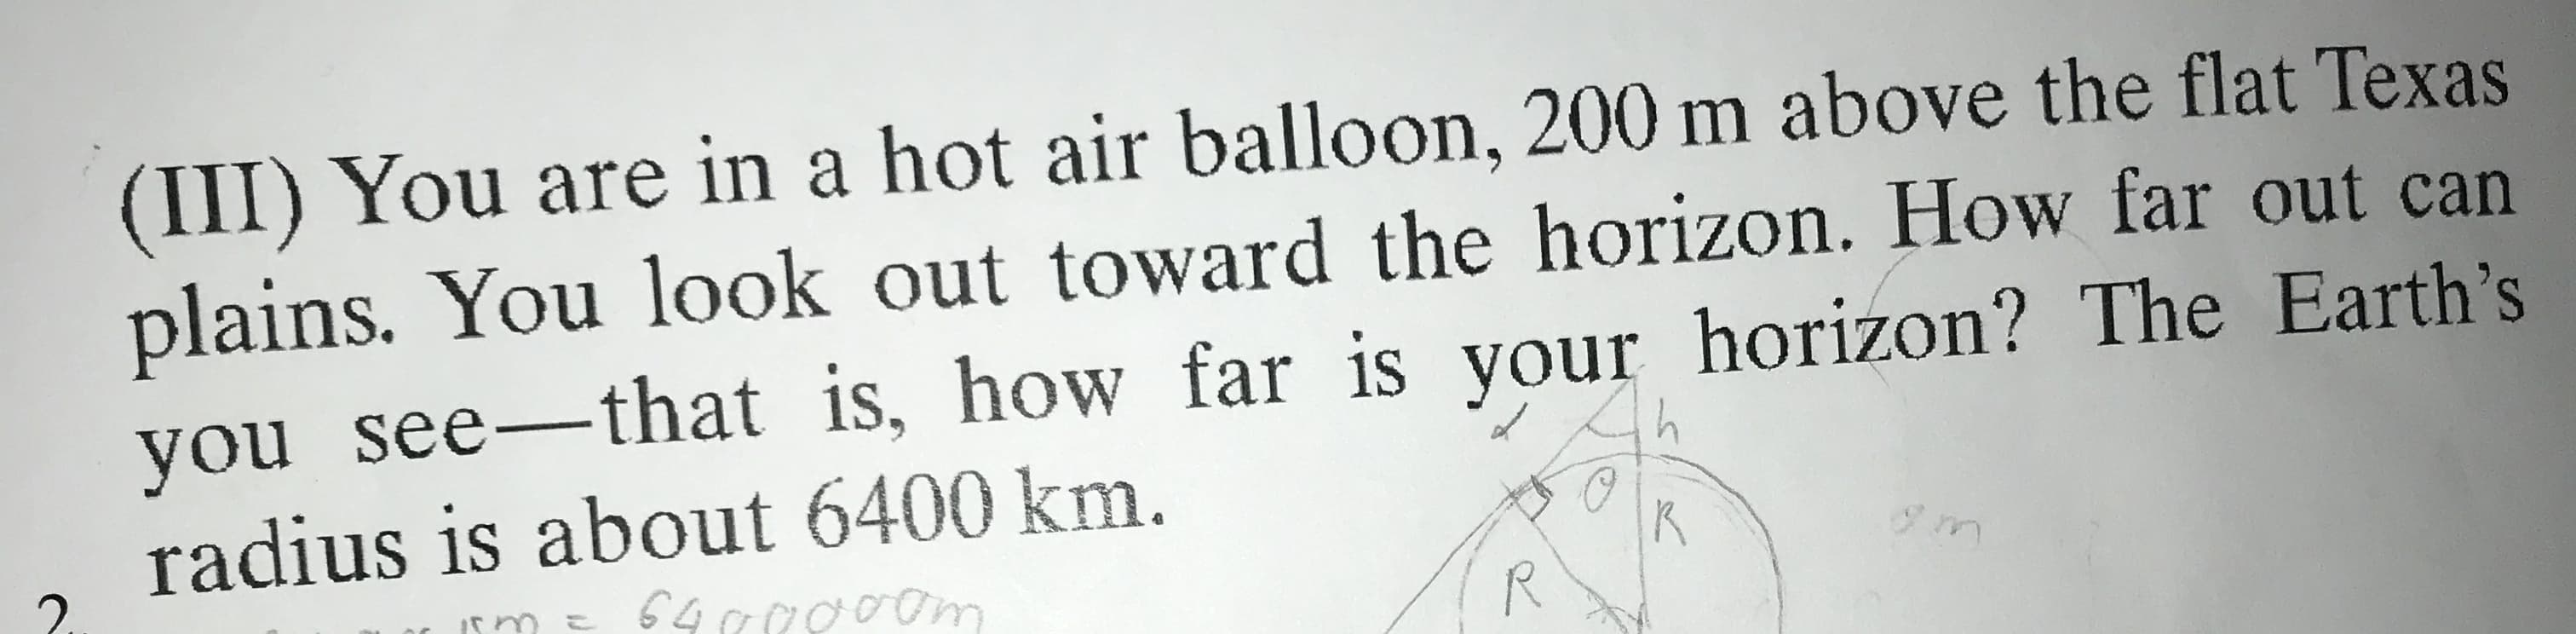 (III) You are in a hot air balloon, 200 m above the flat Texas
plains. You look out toward the horizon. How far out can
you see-that is, how far is your horizon? The Earth's
radius is about 6400 km.
